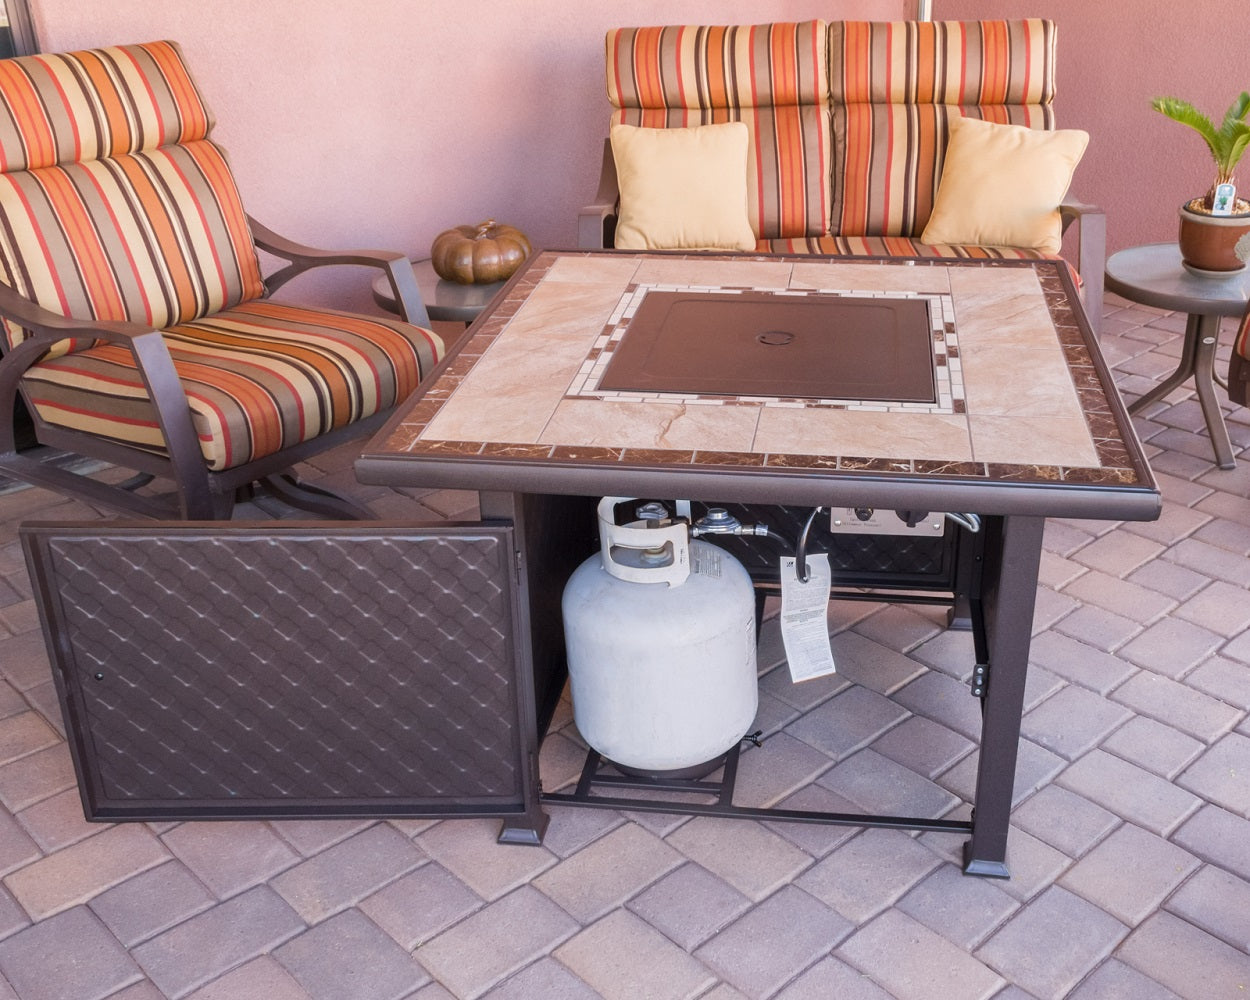 Square Marble Tile Top Fire Pit